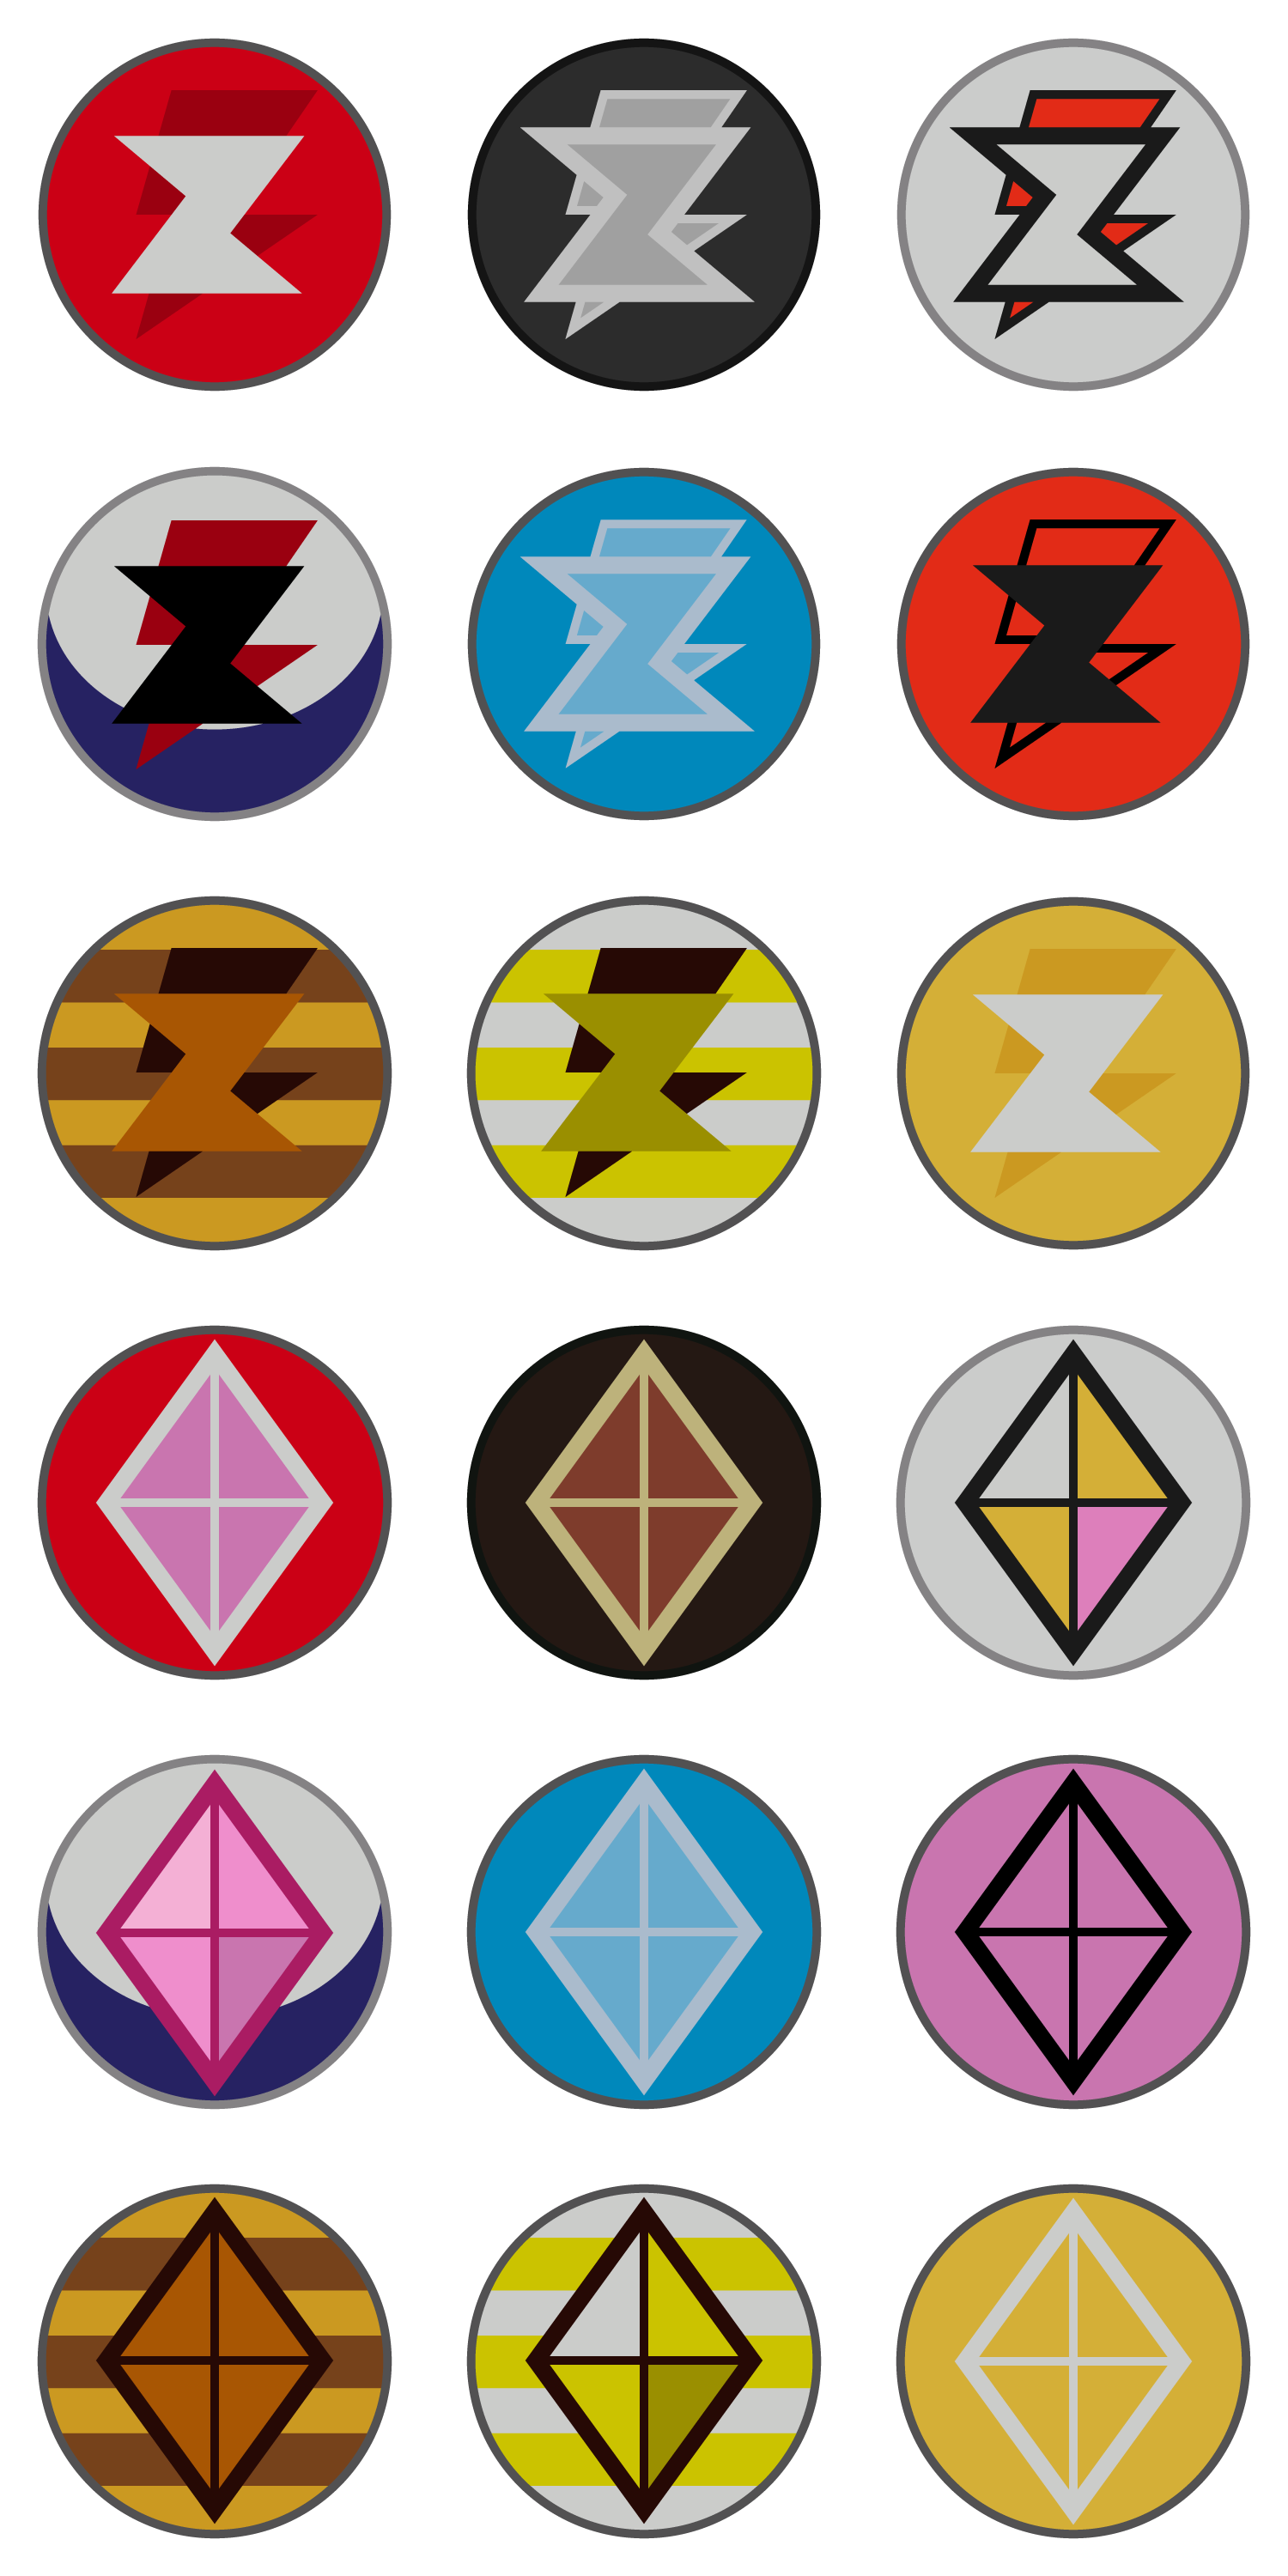 Z-and-Millie-powerup-emblems.png